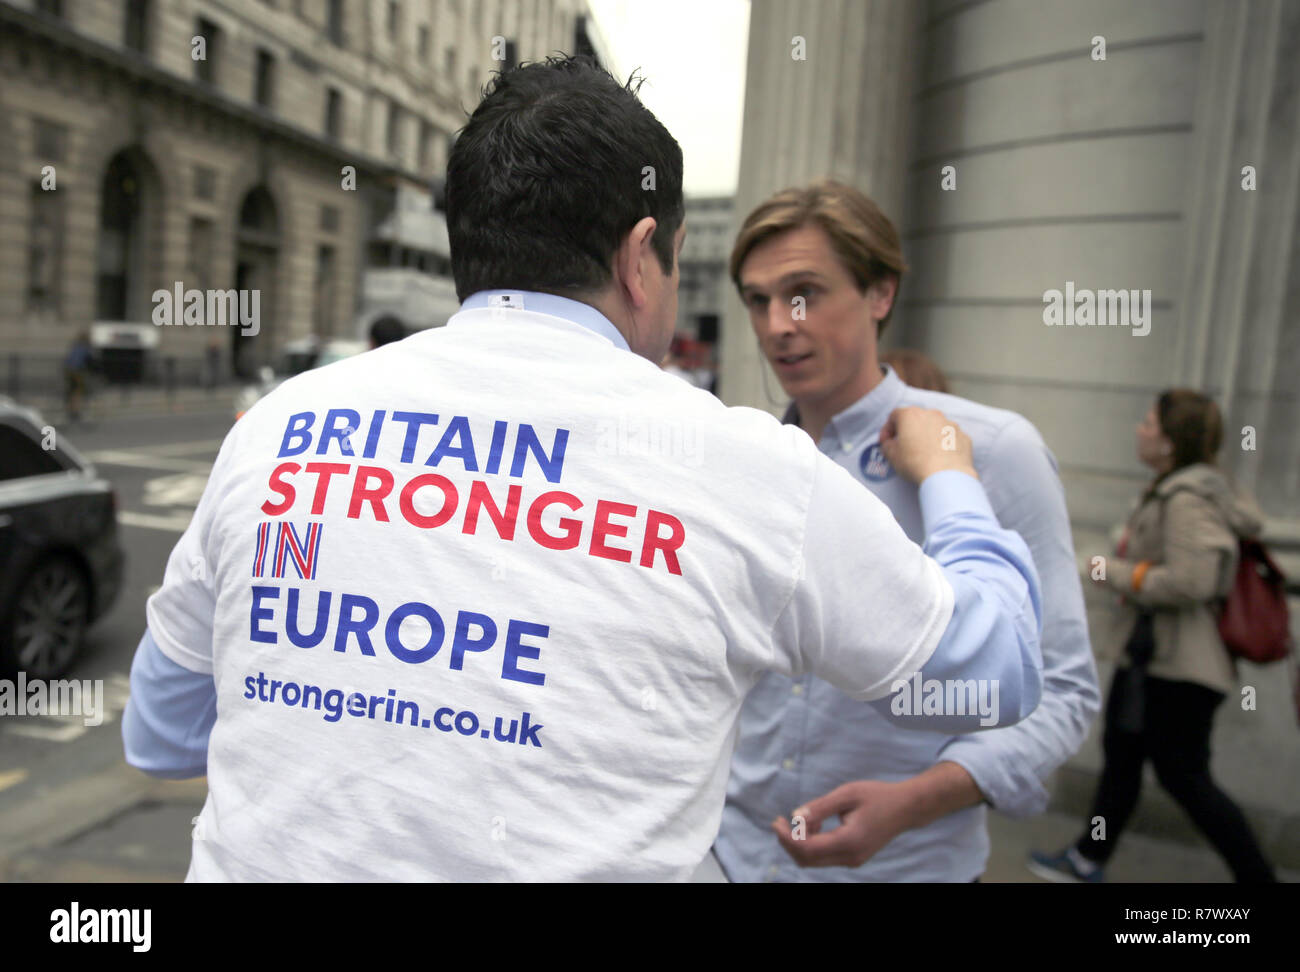 London, Britain. 23rd June, 2016. An activist of the 'Britain stronger in Europe' campaign distributes stickers for the Remain campaign on the day of the EU referendum, in London, Britain, 23 June 2016. Britons are to vote on whether to remain in or leave the EU in a referendum on the same day. Credit: MICHAEL KAPPELER/dpa | usage worldwide/dpa/Alamy Live News Stock Photo